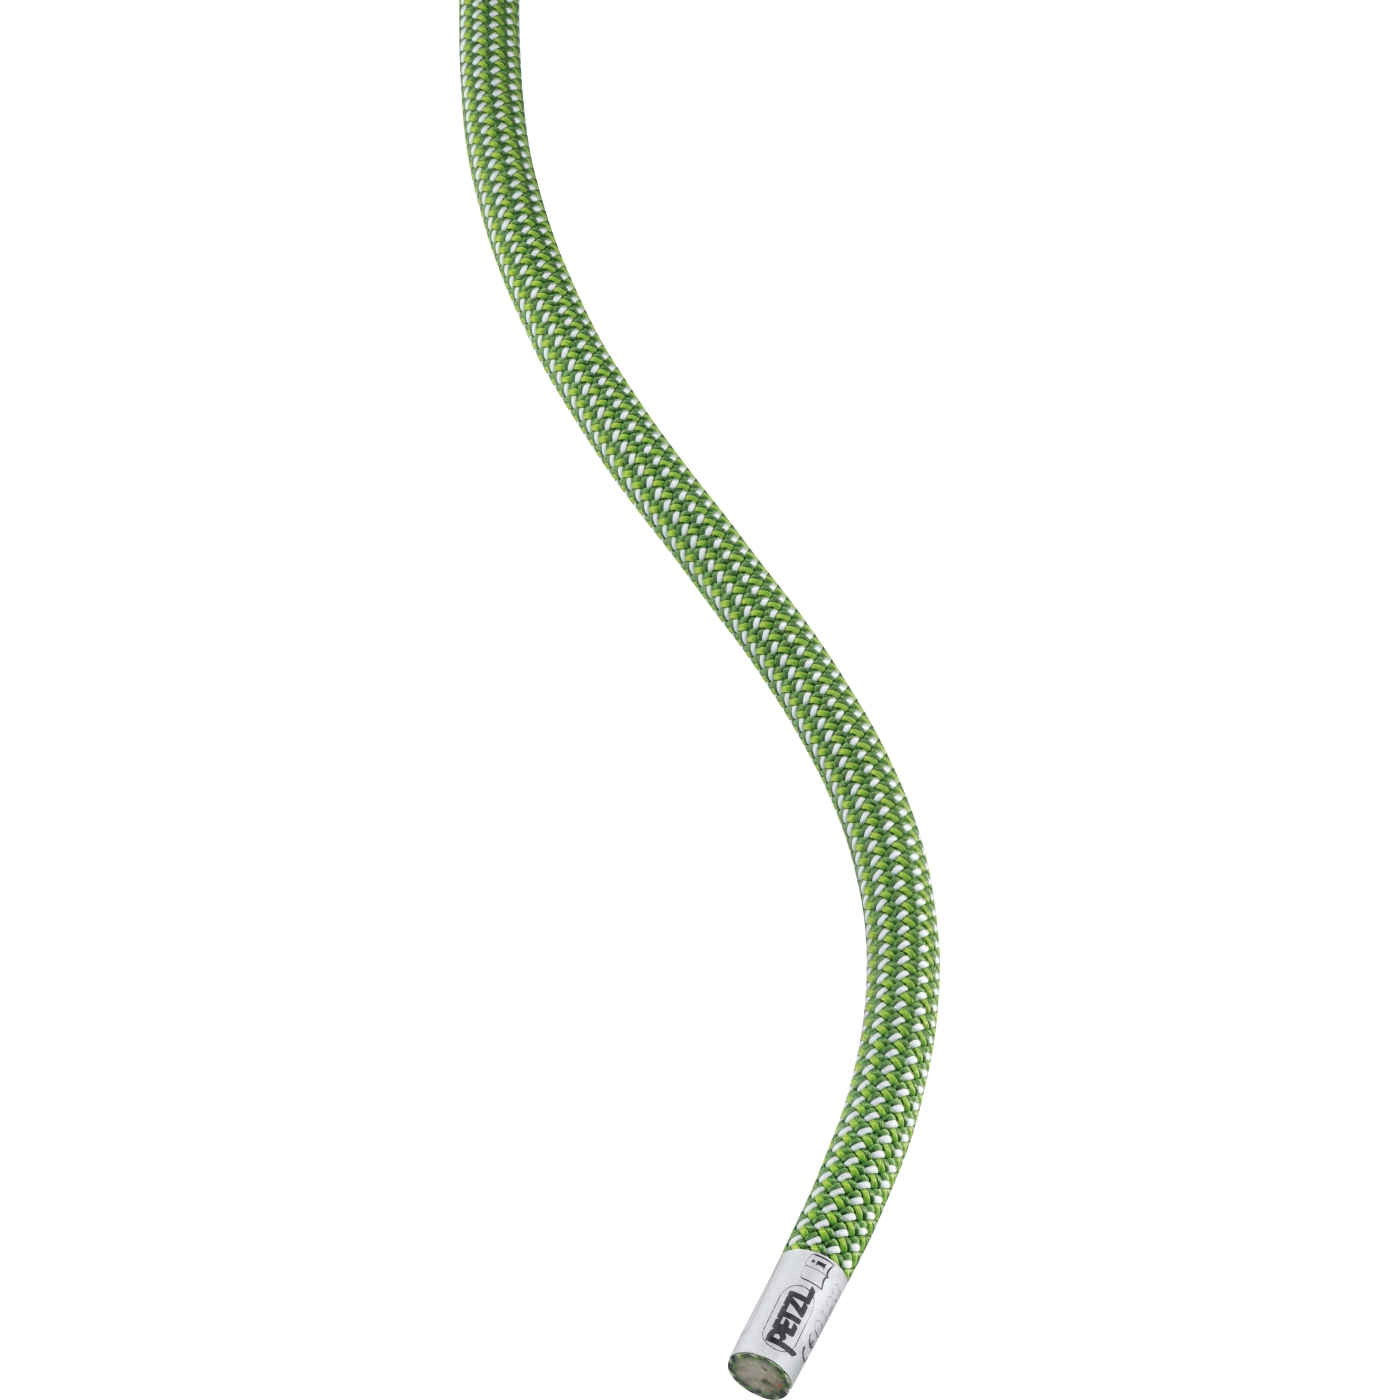 Picture of Petzl Contact Wall 9.8mm Rope - 40m - green